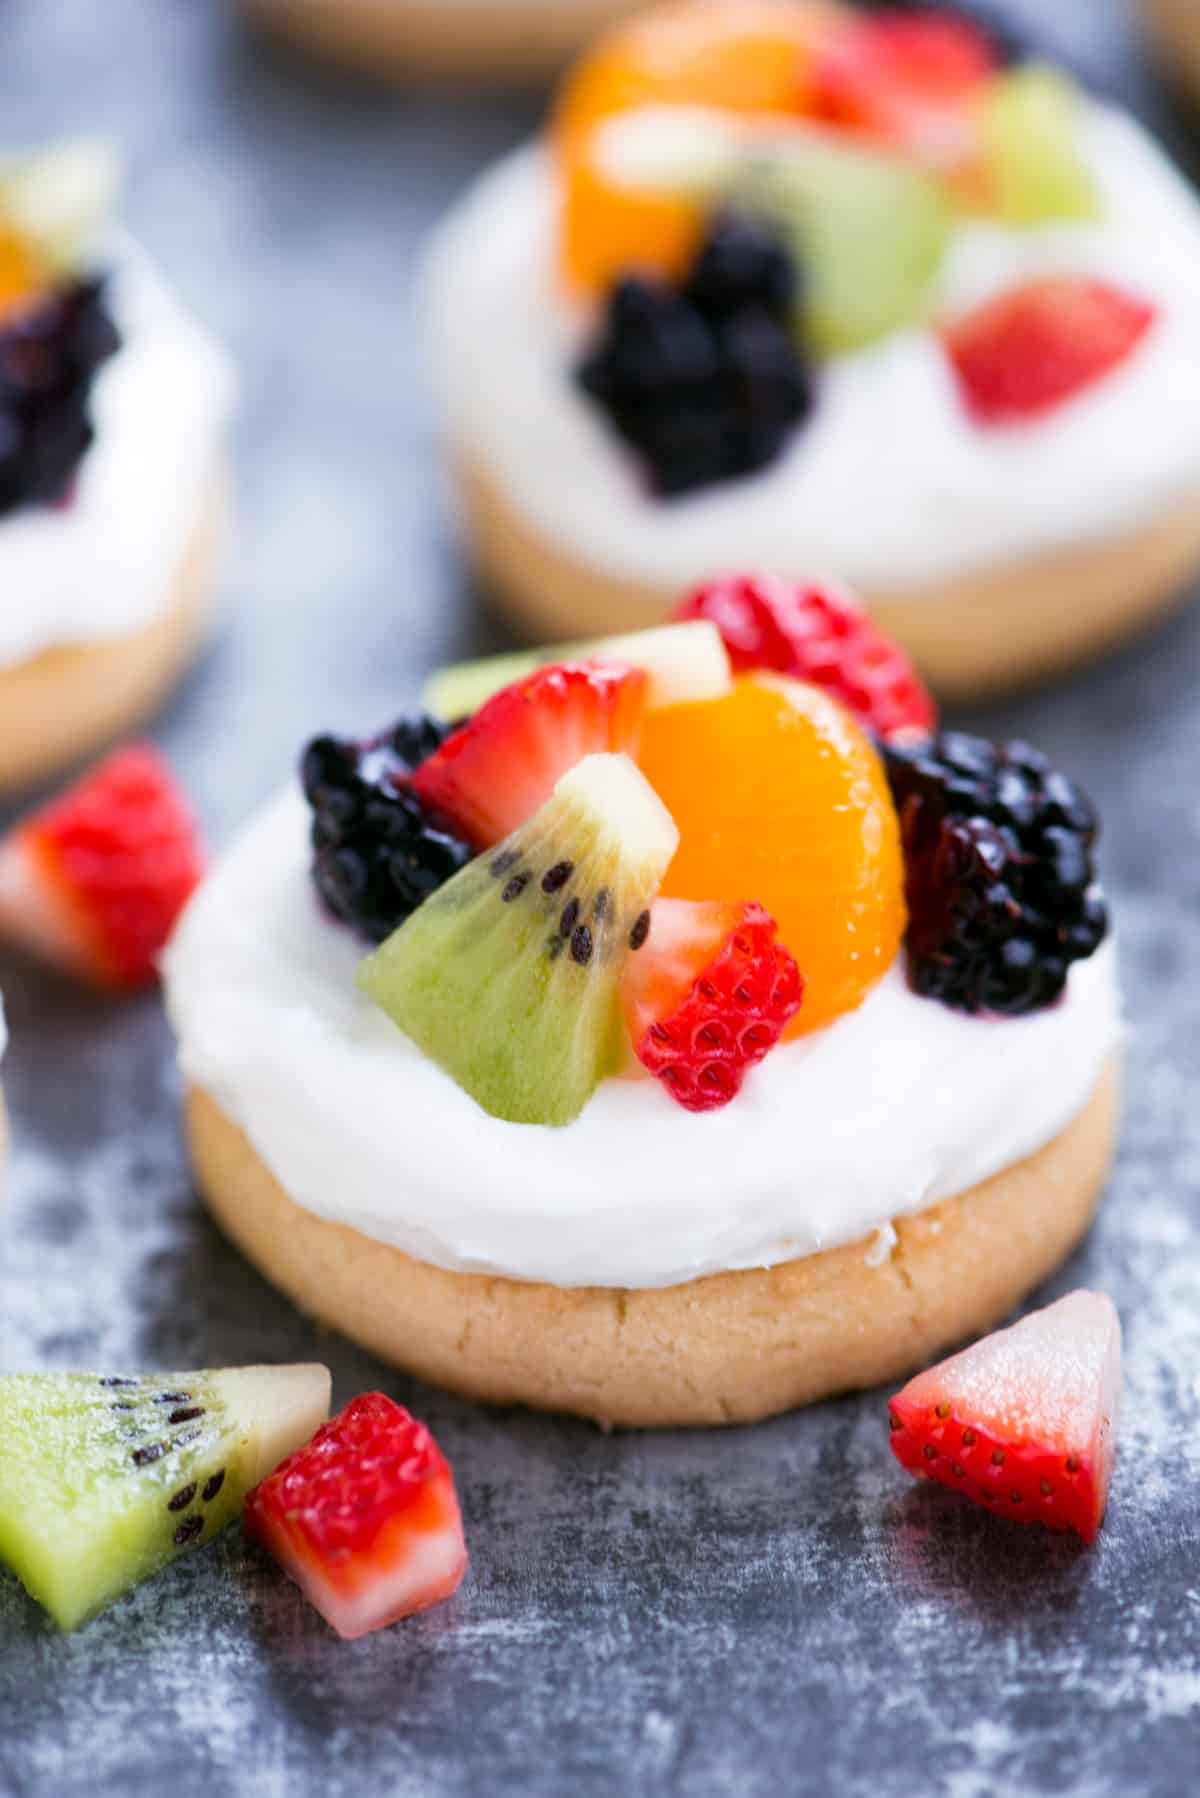 Mini fruit pizzas with cream cheese frosting and diced fruit.